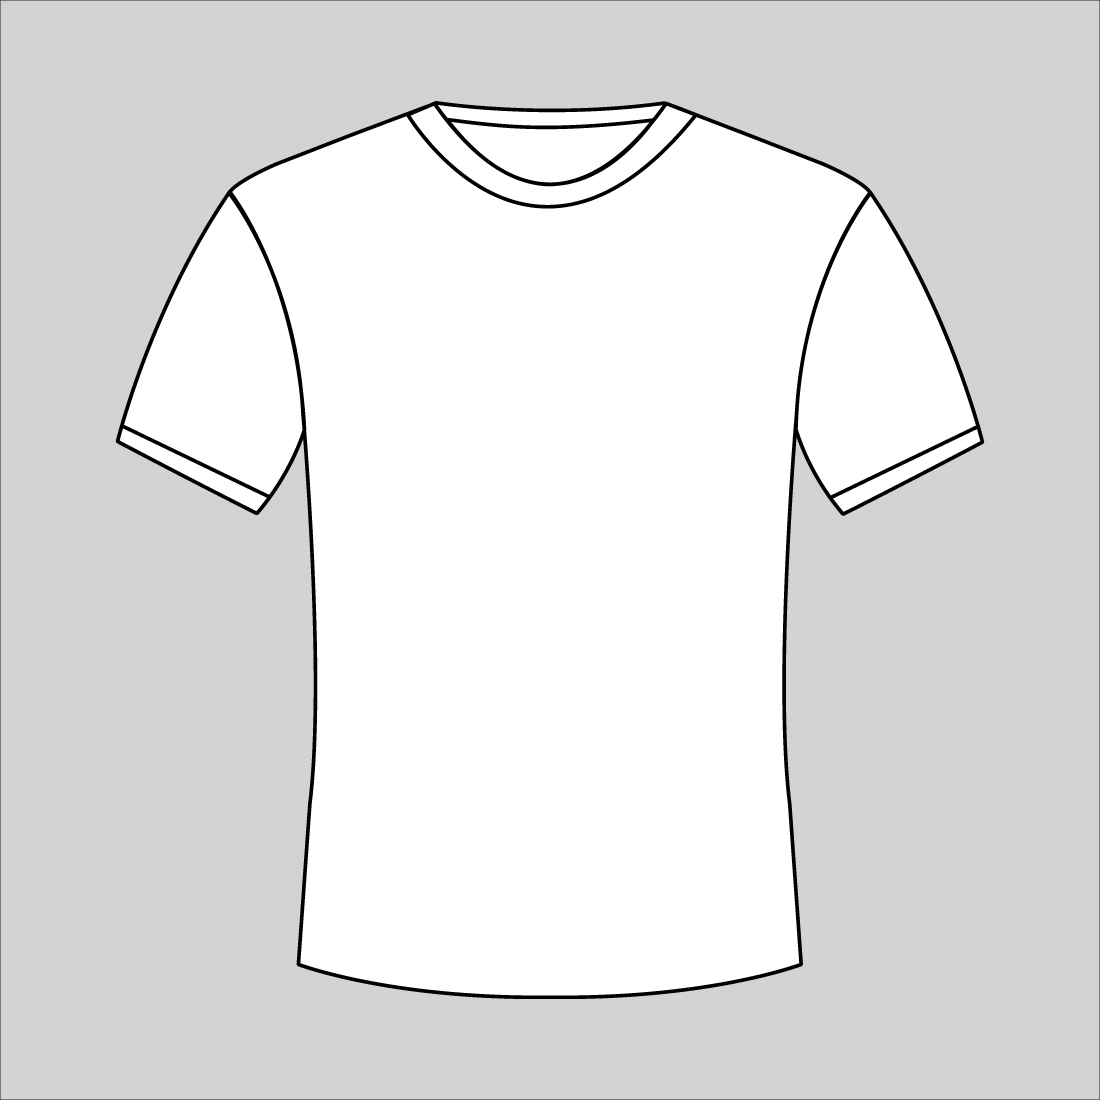 T Shirt Outline Template Museosdelima